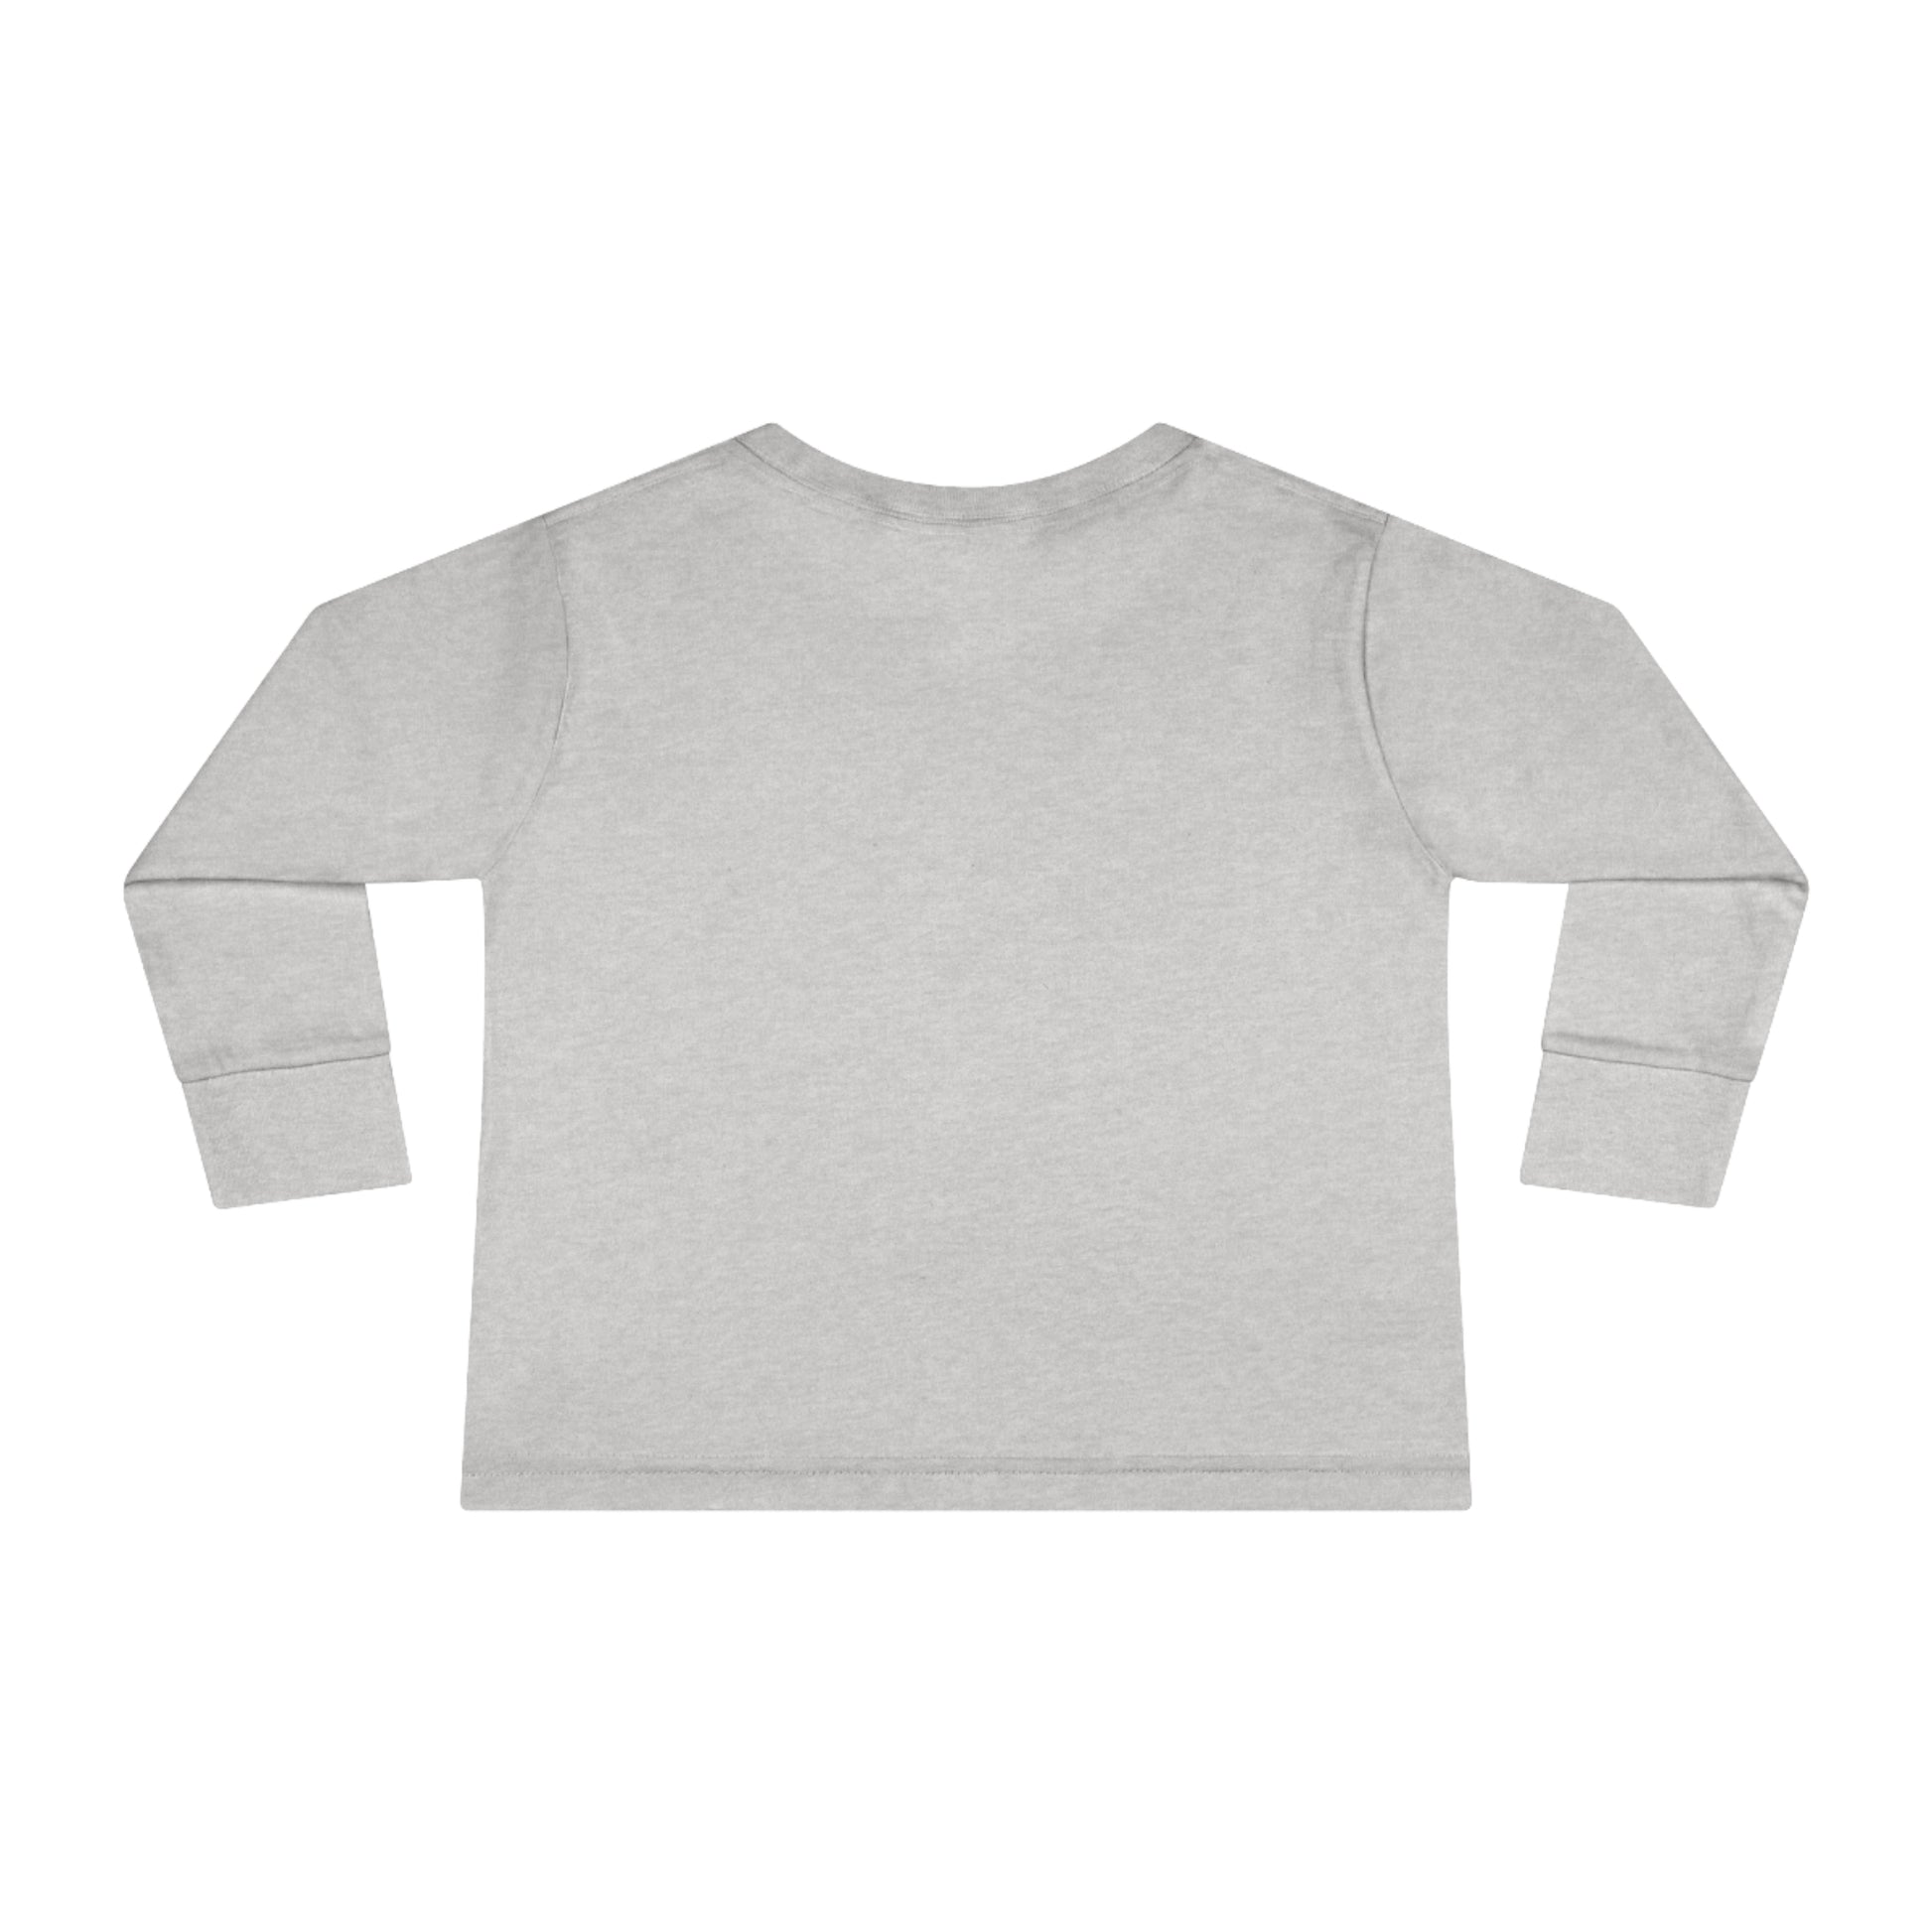 Blessed To Be An Answered Prayer Toddler Christian Sweatshirt Printify